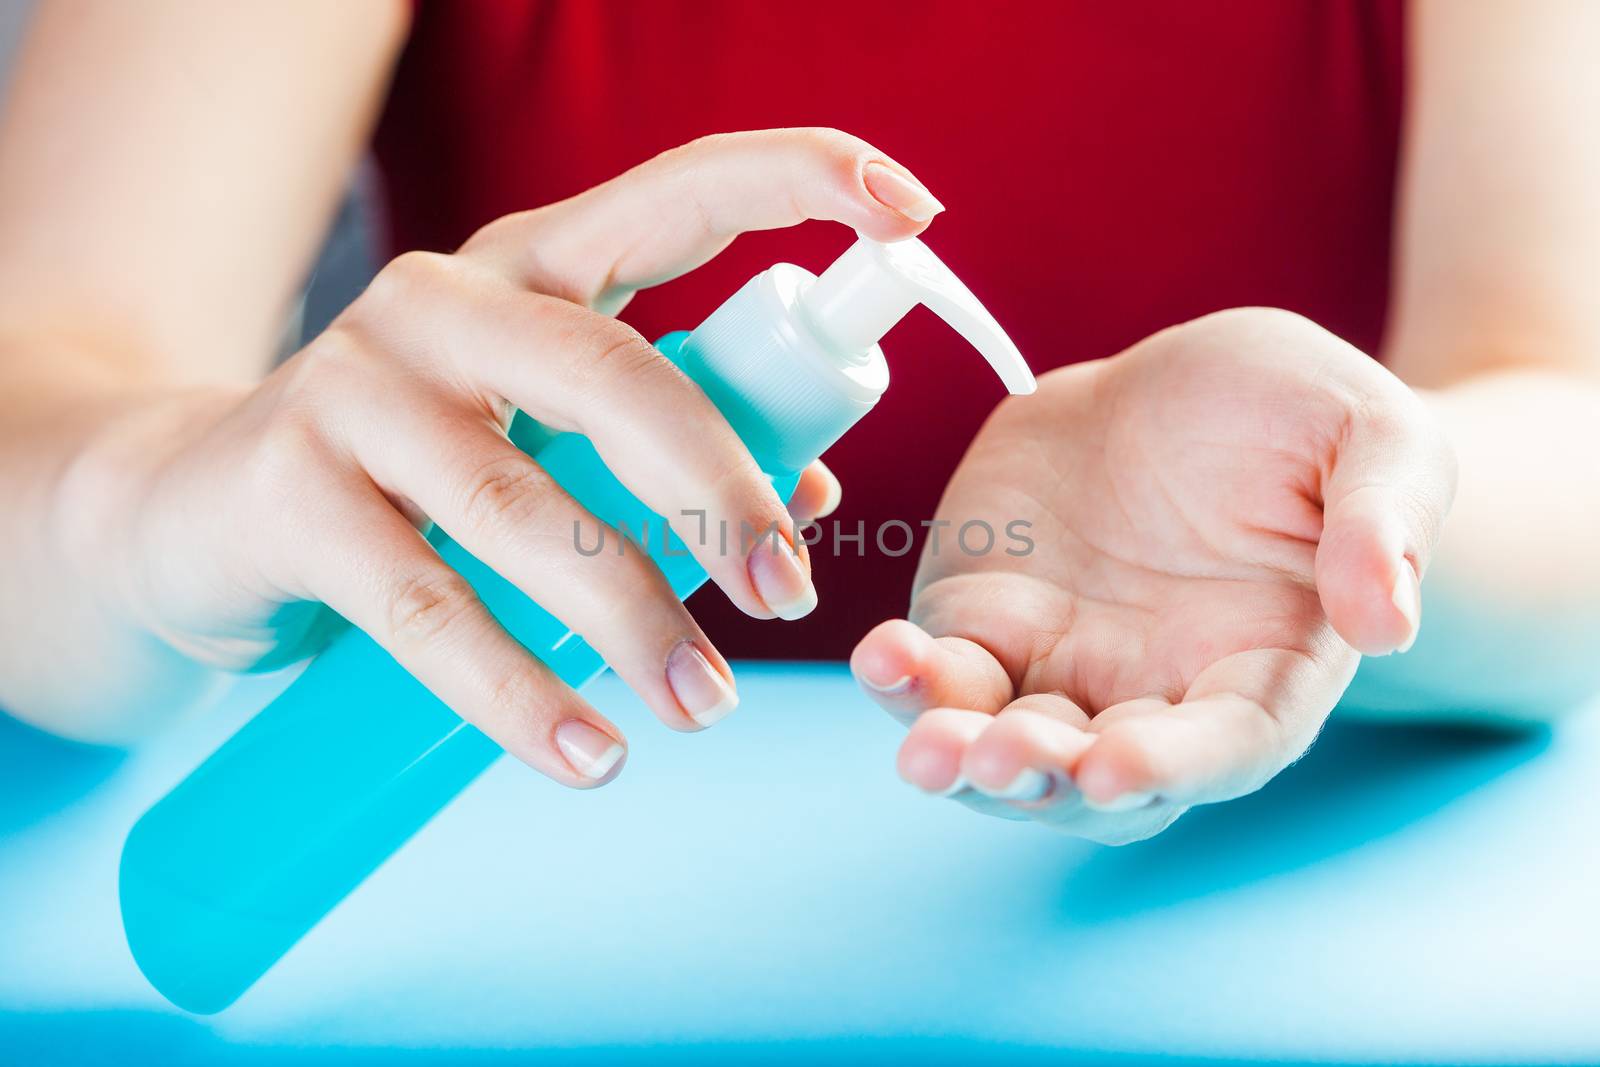 Caucasian woman applying dry hand wash sanitizer gel,protection from transfer and spread of virus disease,global Coronavirus COVID-19 pandemic outbreak crisis,hygiene and protection from germ bacteria